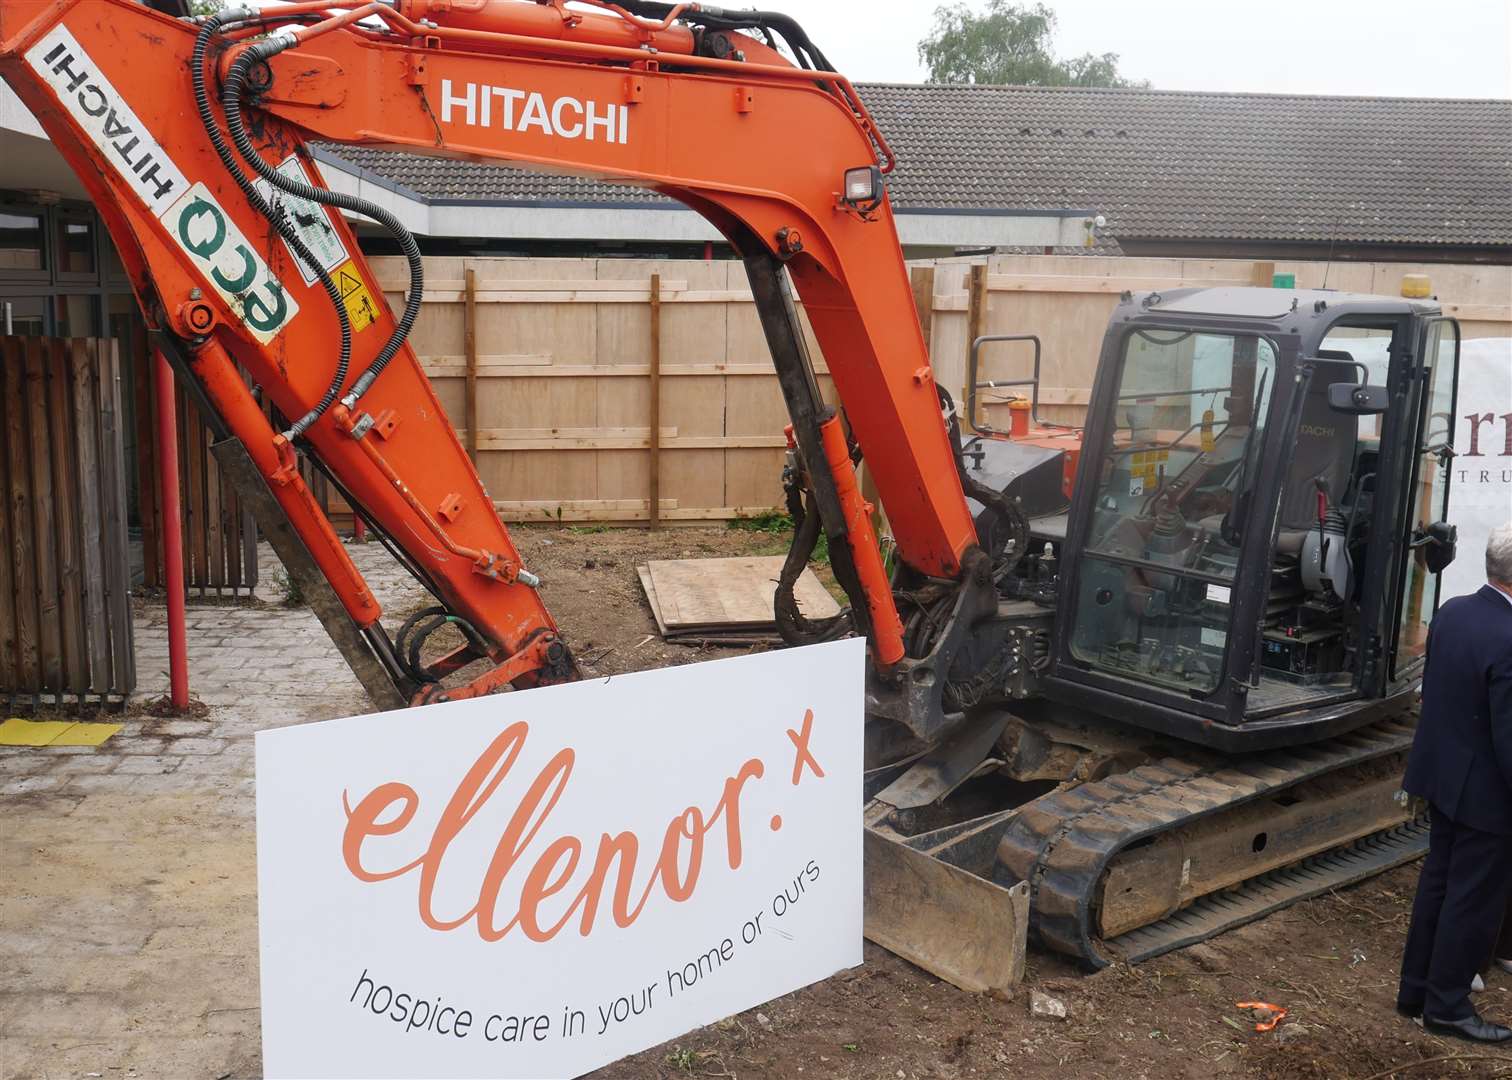 Digger on site of Ellenors construction area